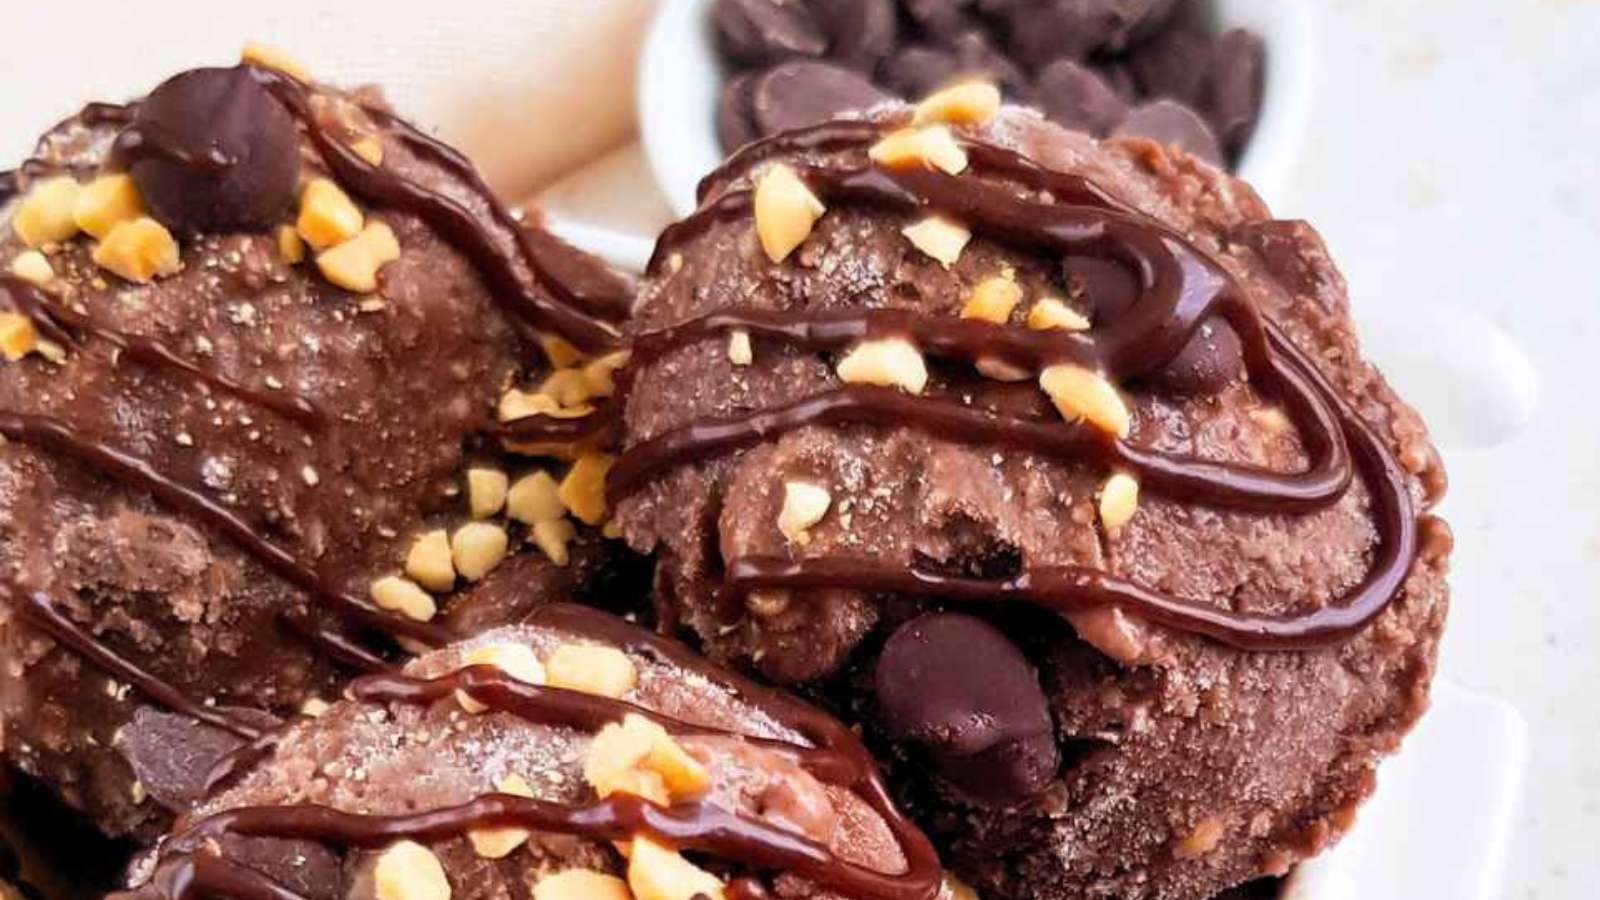 A bowl of chocolate ice cream topped with nuts and drizzled with chocolate.